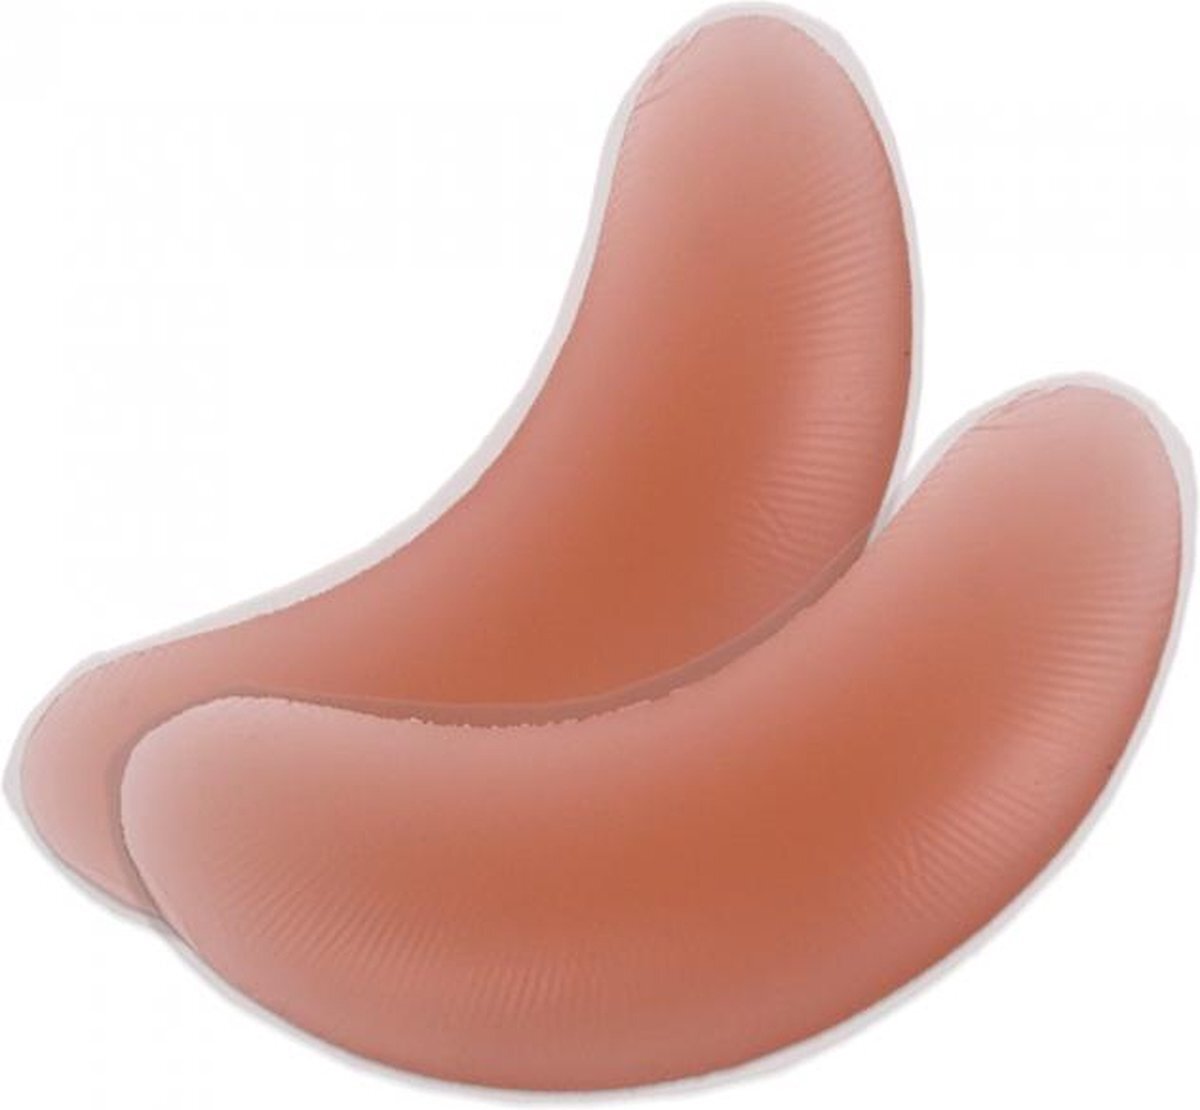 Wellys Wellys®GI-041502: Pair of Silicone Bra Lift Insert